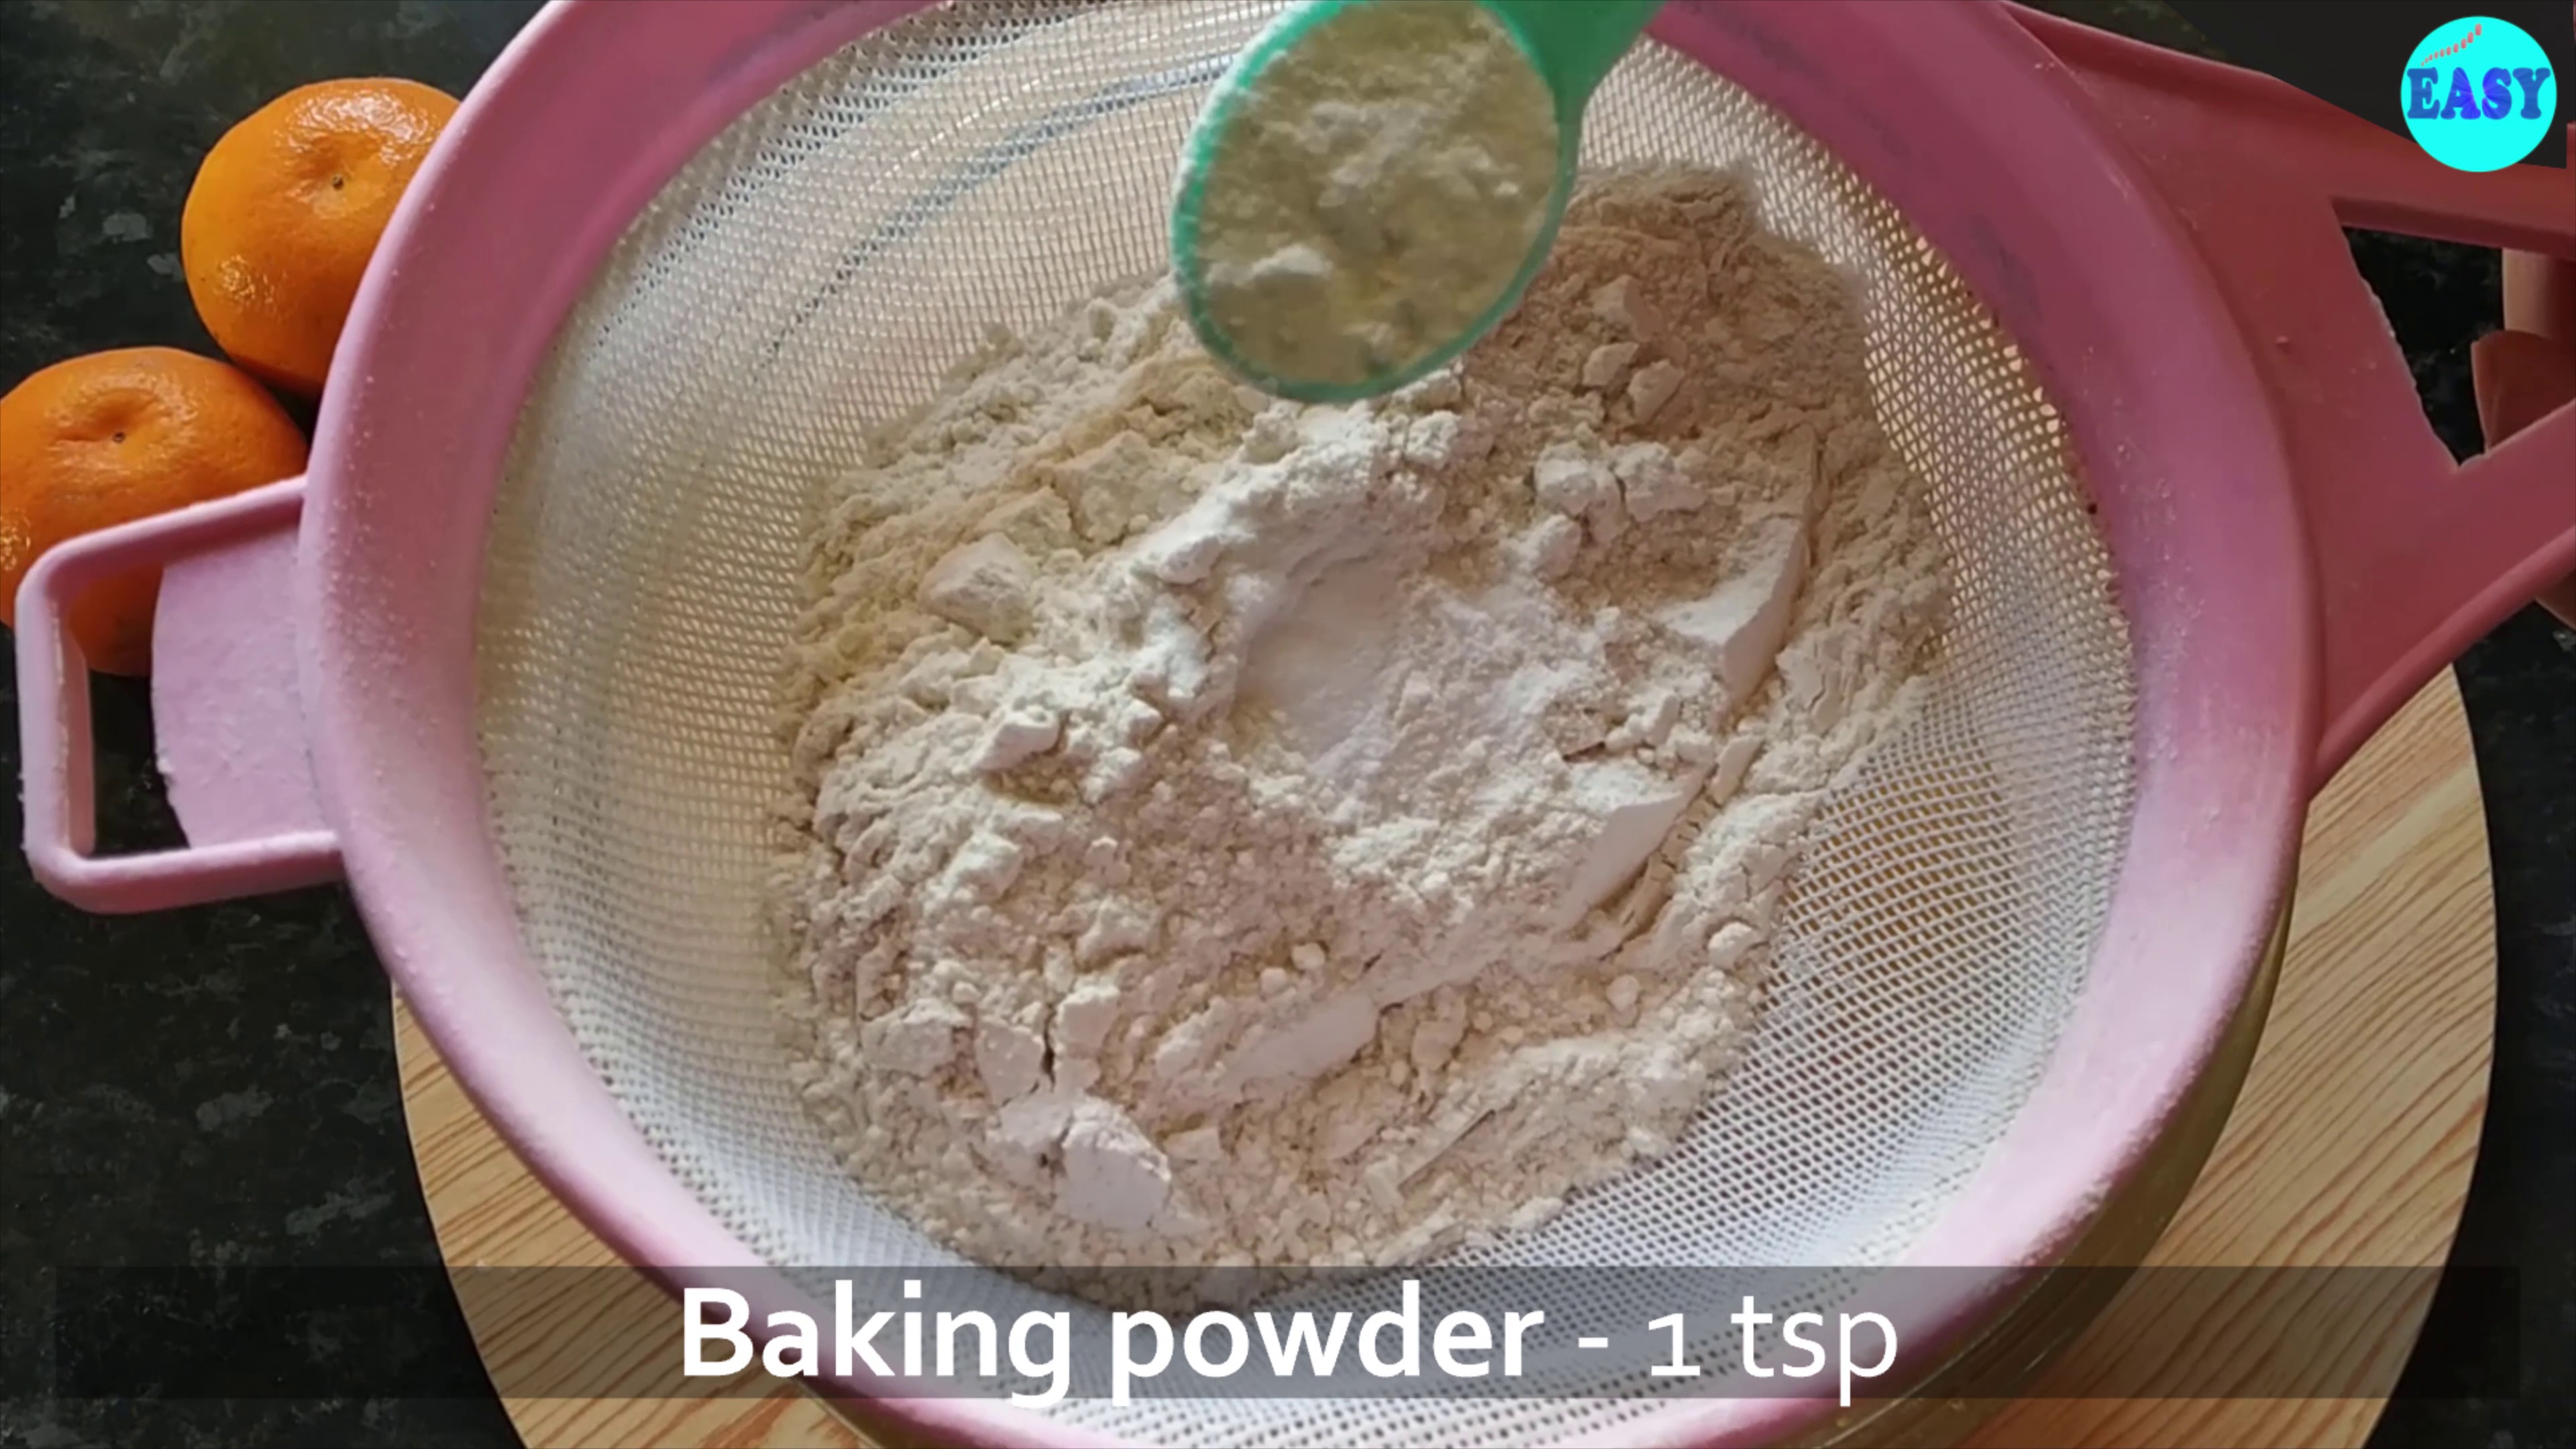 Step 3 - Now take a sieve and add plain flour, baking soda, baking powder and salt to it.